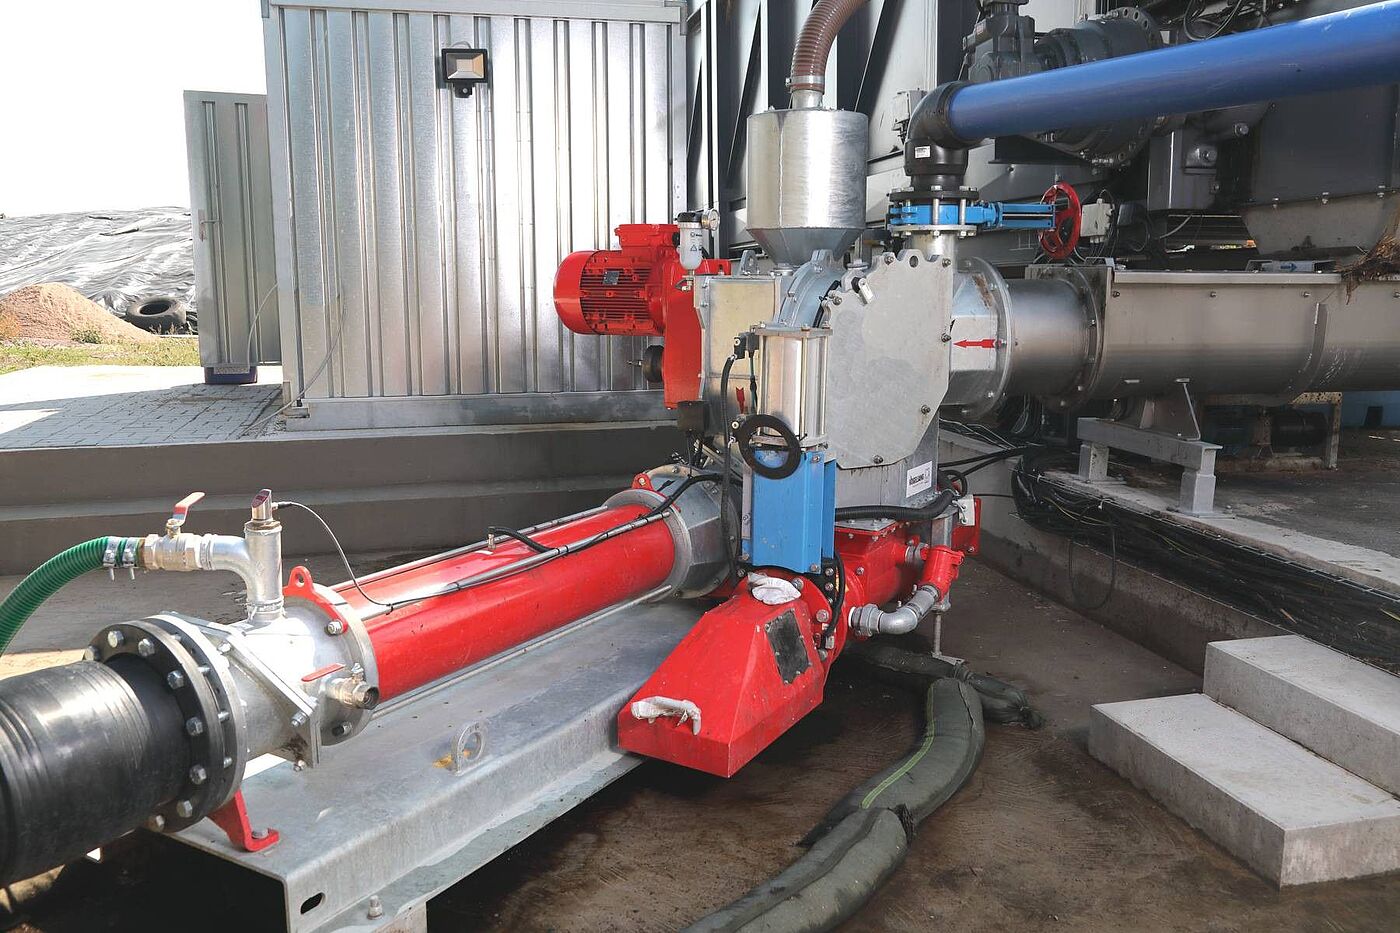 Debris Removal System (DRS) in combination with a PreMix for biogas applications